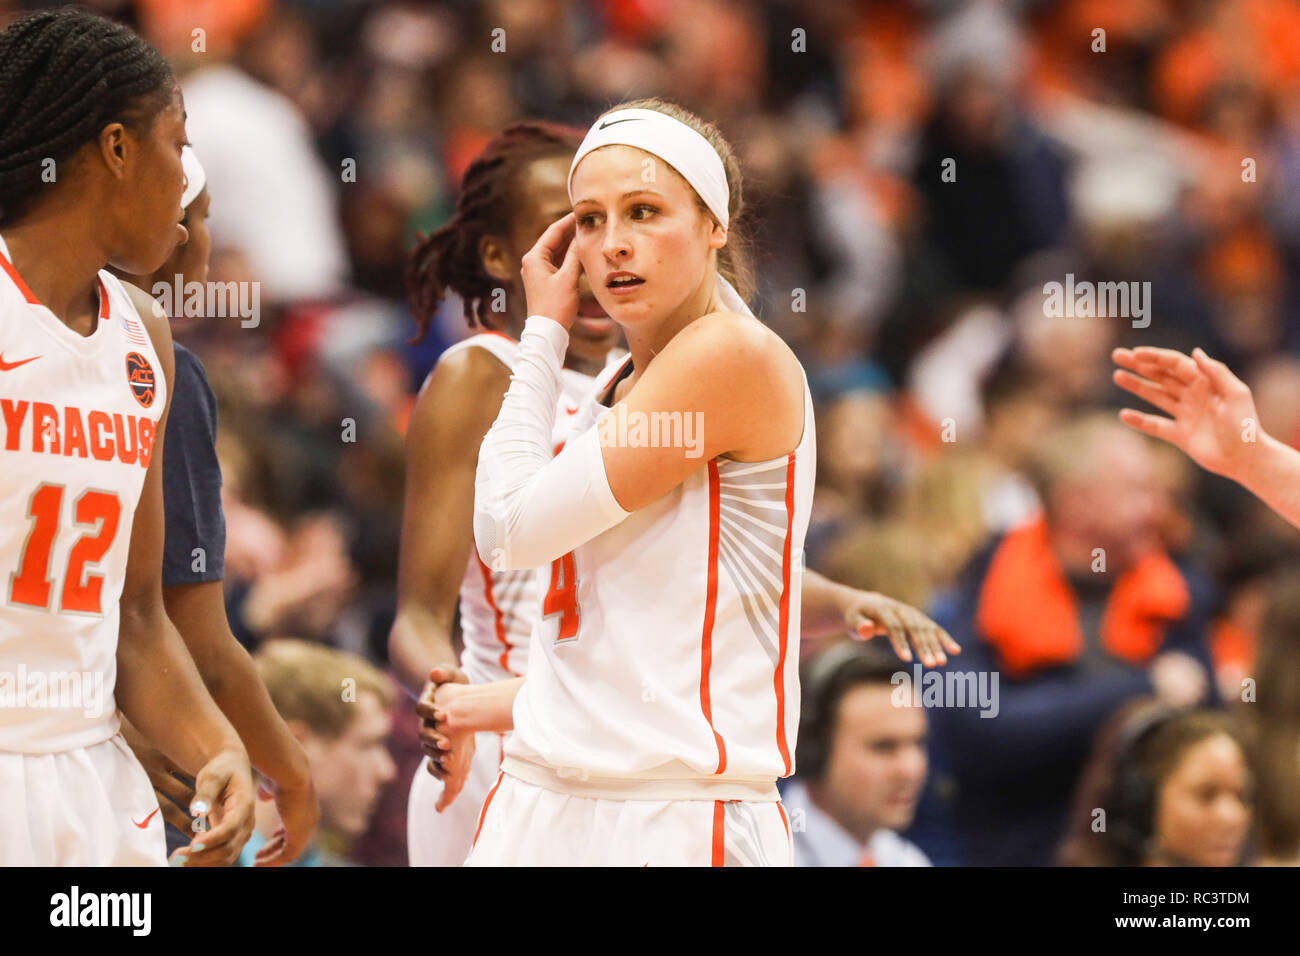 Syracuse, New York, USA. 13th Jan, 2019. January 13, 2019 : Syracuse's Tiana Mangakahia (4) celebrates with her teammates after scoring 34 points of the day during the NCAA basketball matchup between the Syracuse Orangewomen and University of North Carolina Lady Tar Heels at the Carrier Dome in Syracuse, New York. Syracuse defeated North Carolina 90-77. Nick Serrata/Eclipse Sportswire/CSM/Alamy Live News Stock Photo